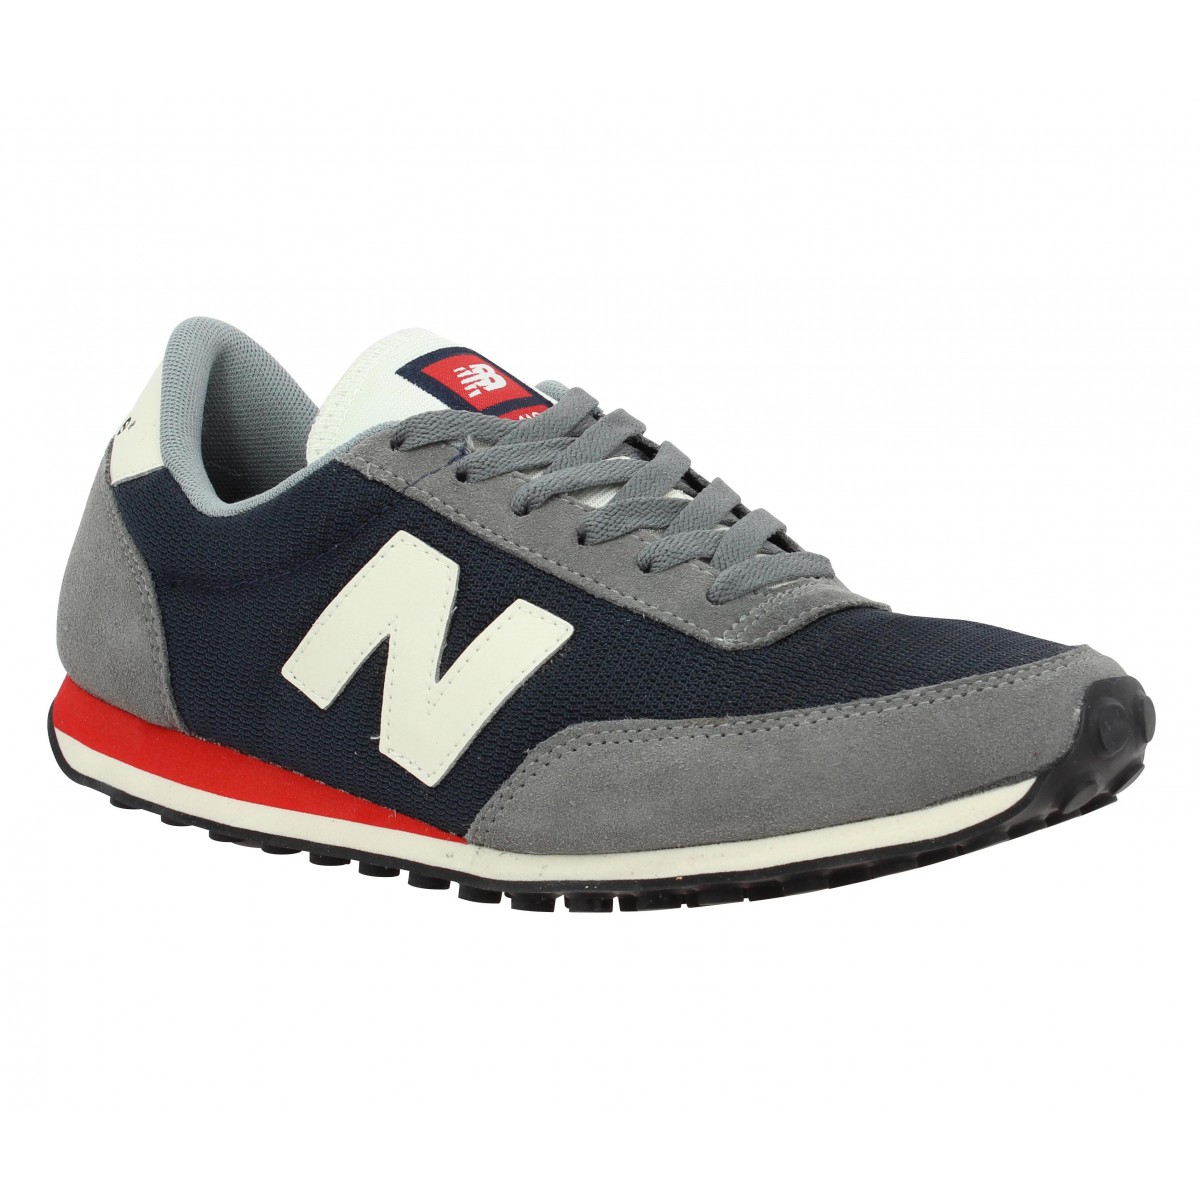 new balance 992 homme or